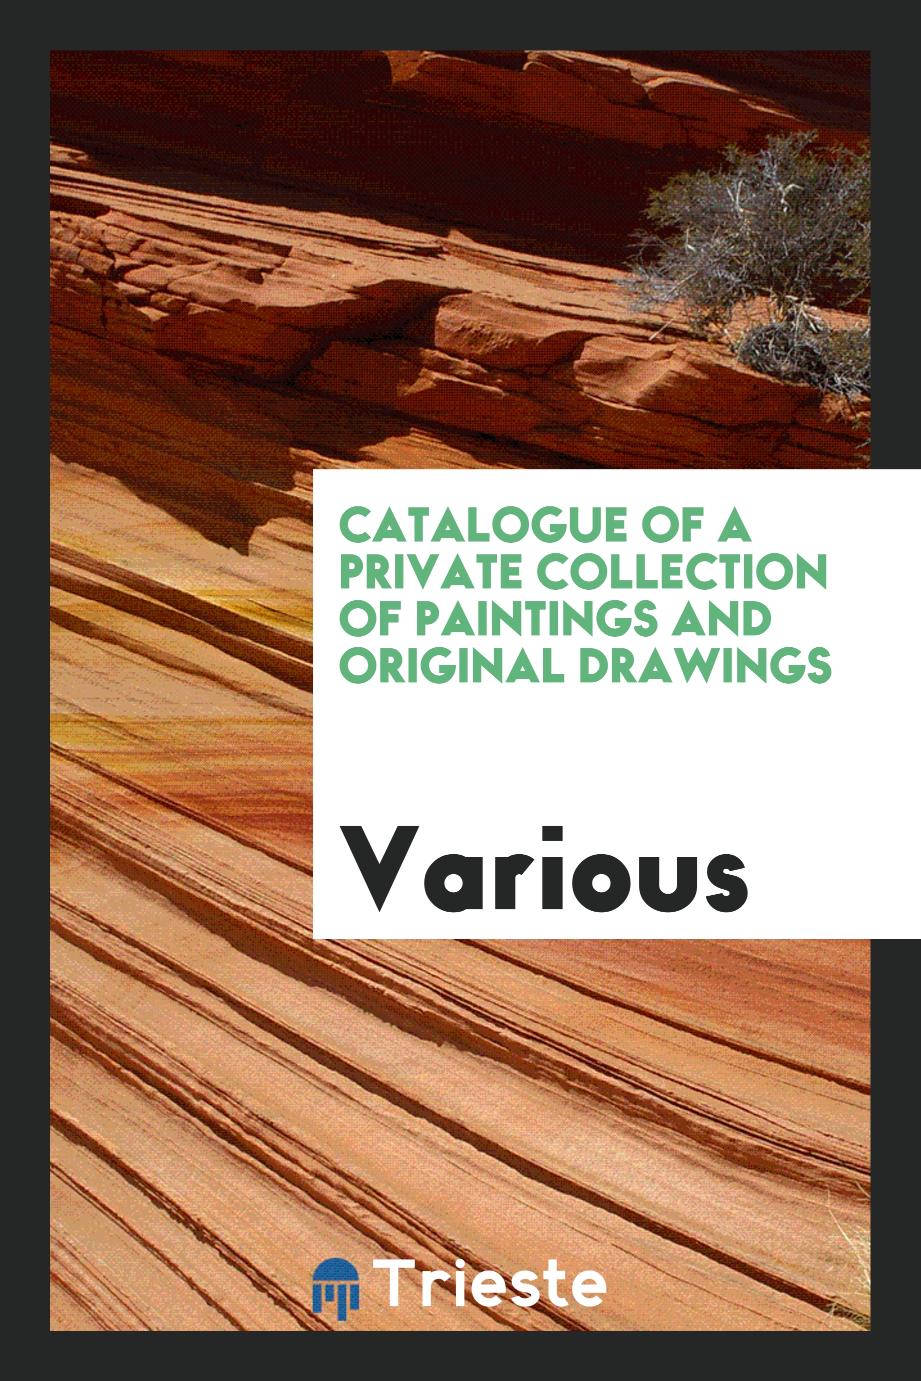 Catalogue of a Private Collection of Paintings and Original Drawings